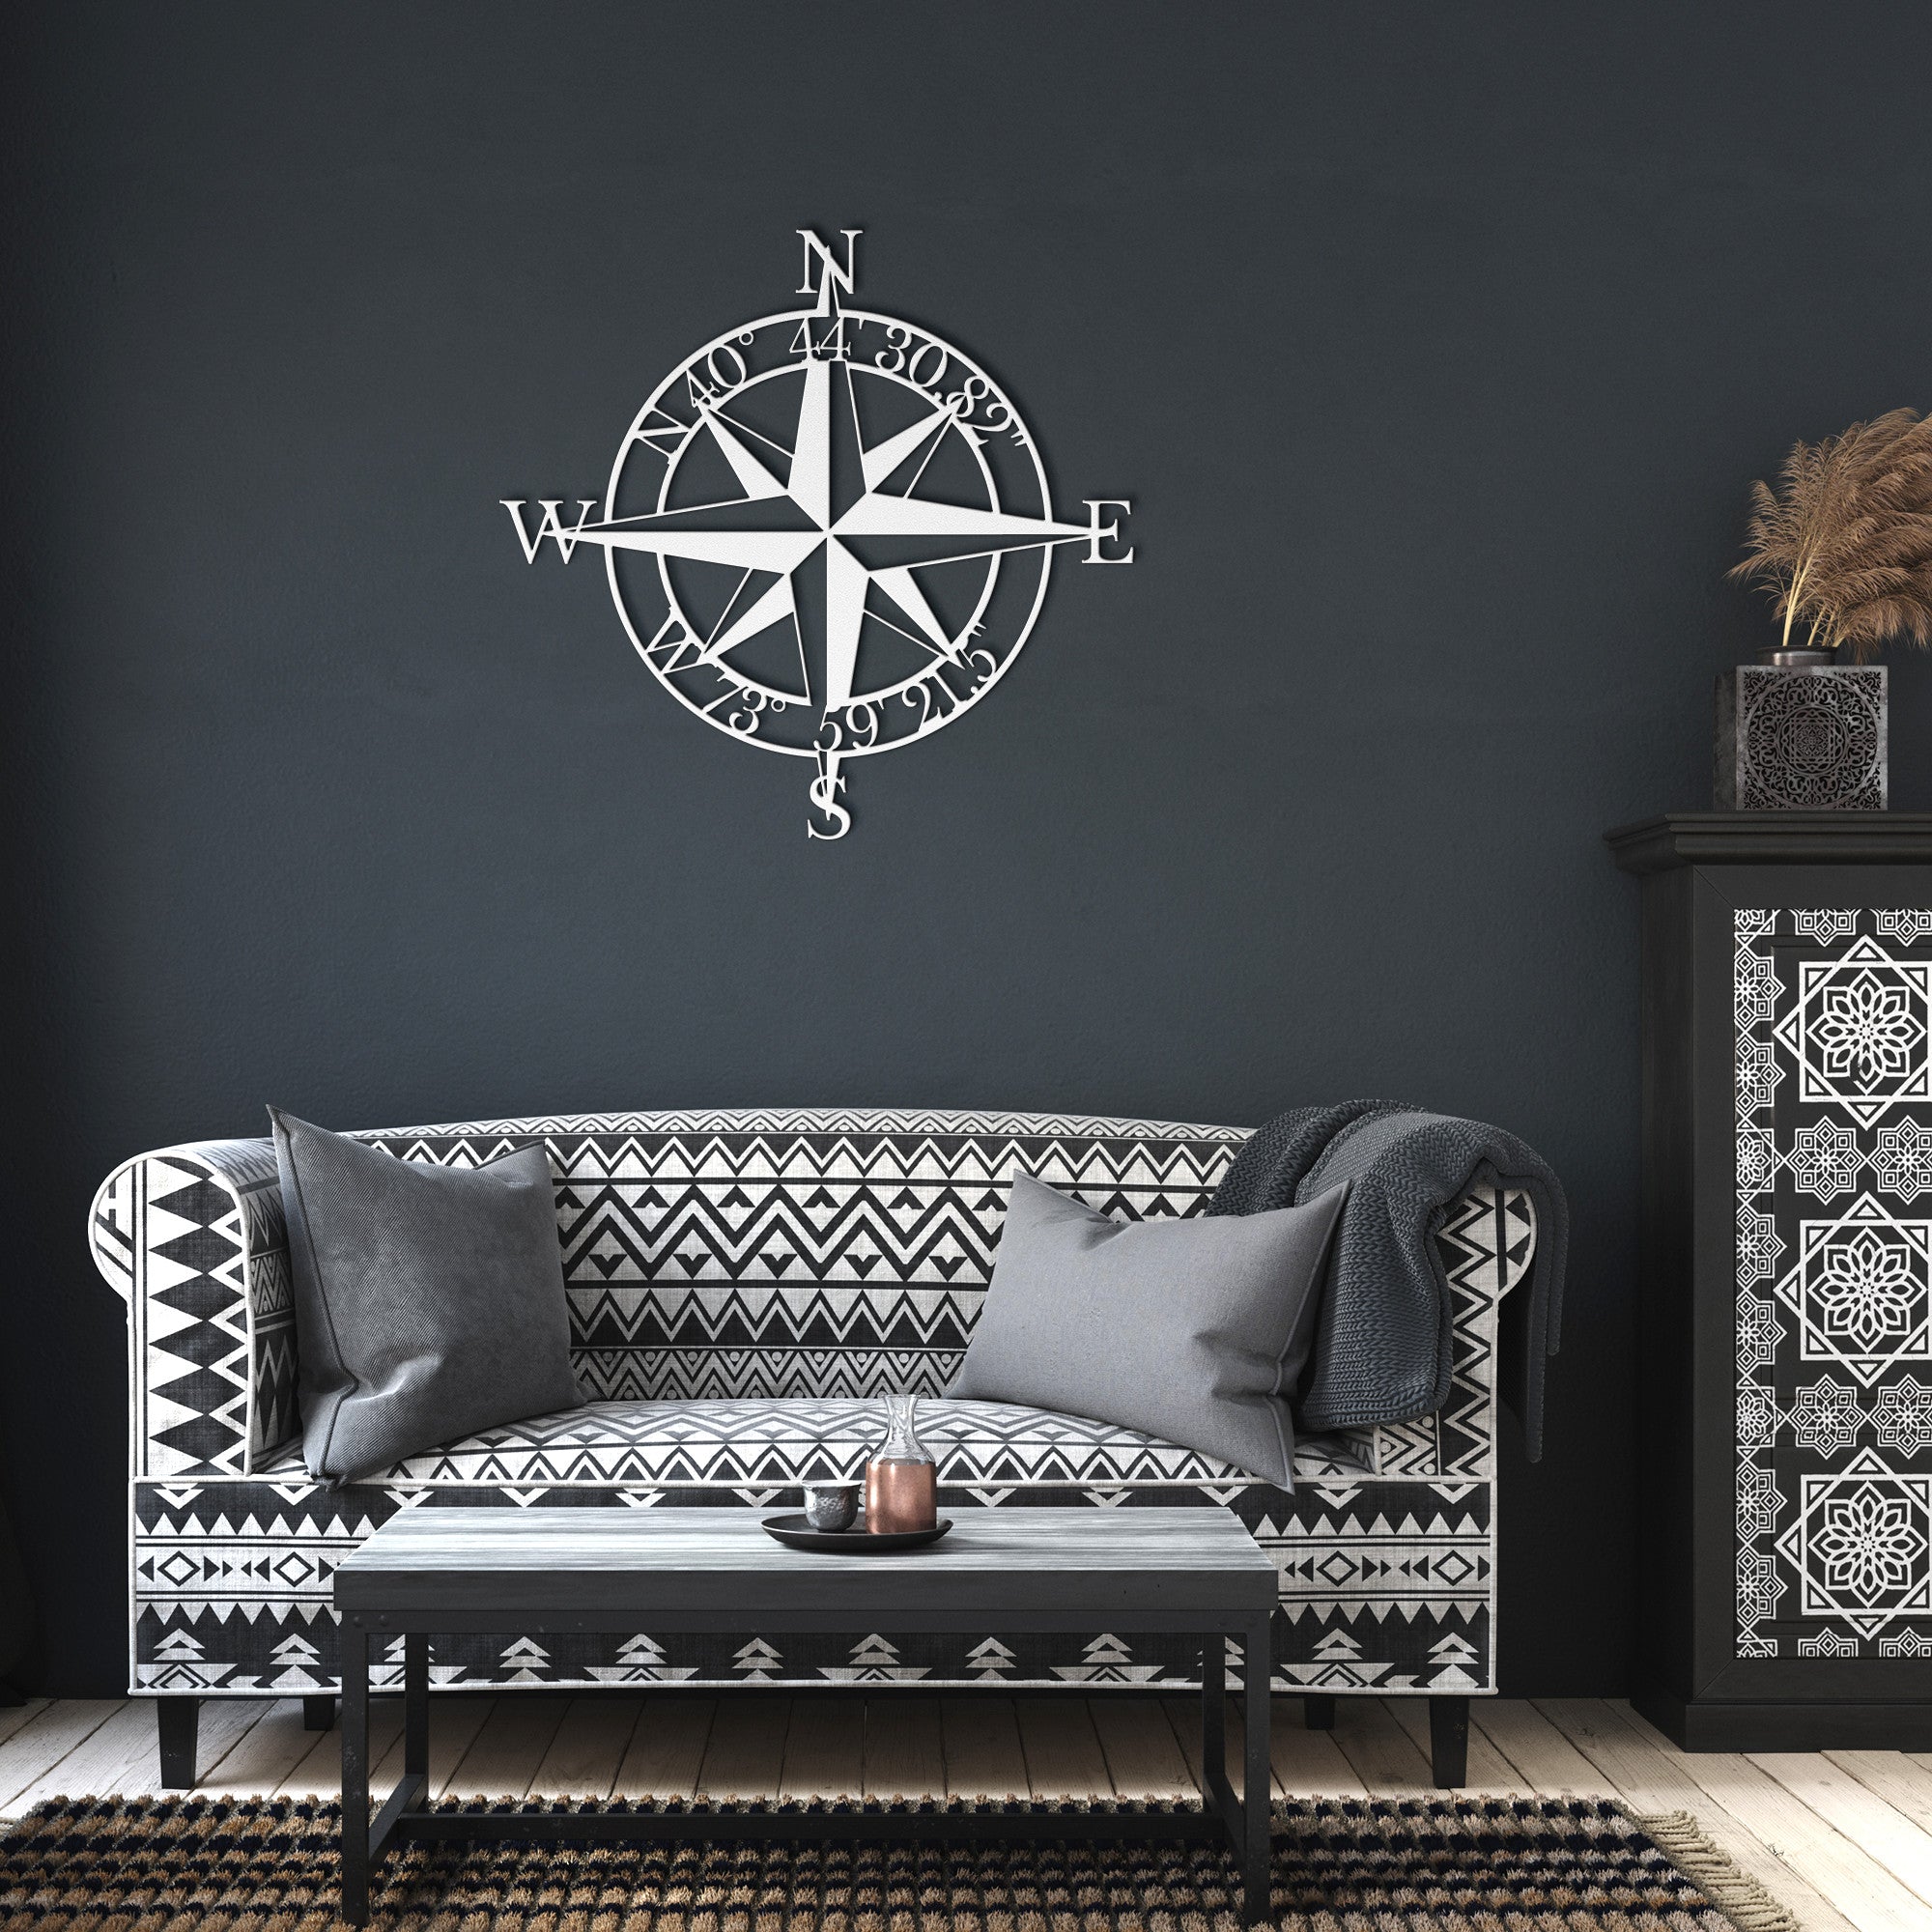 Compass Rose Metal Wall Art w/ Personalized GPS Coordinates